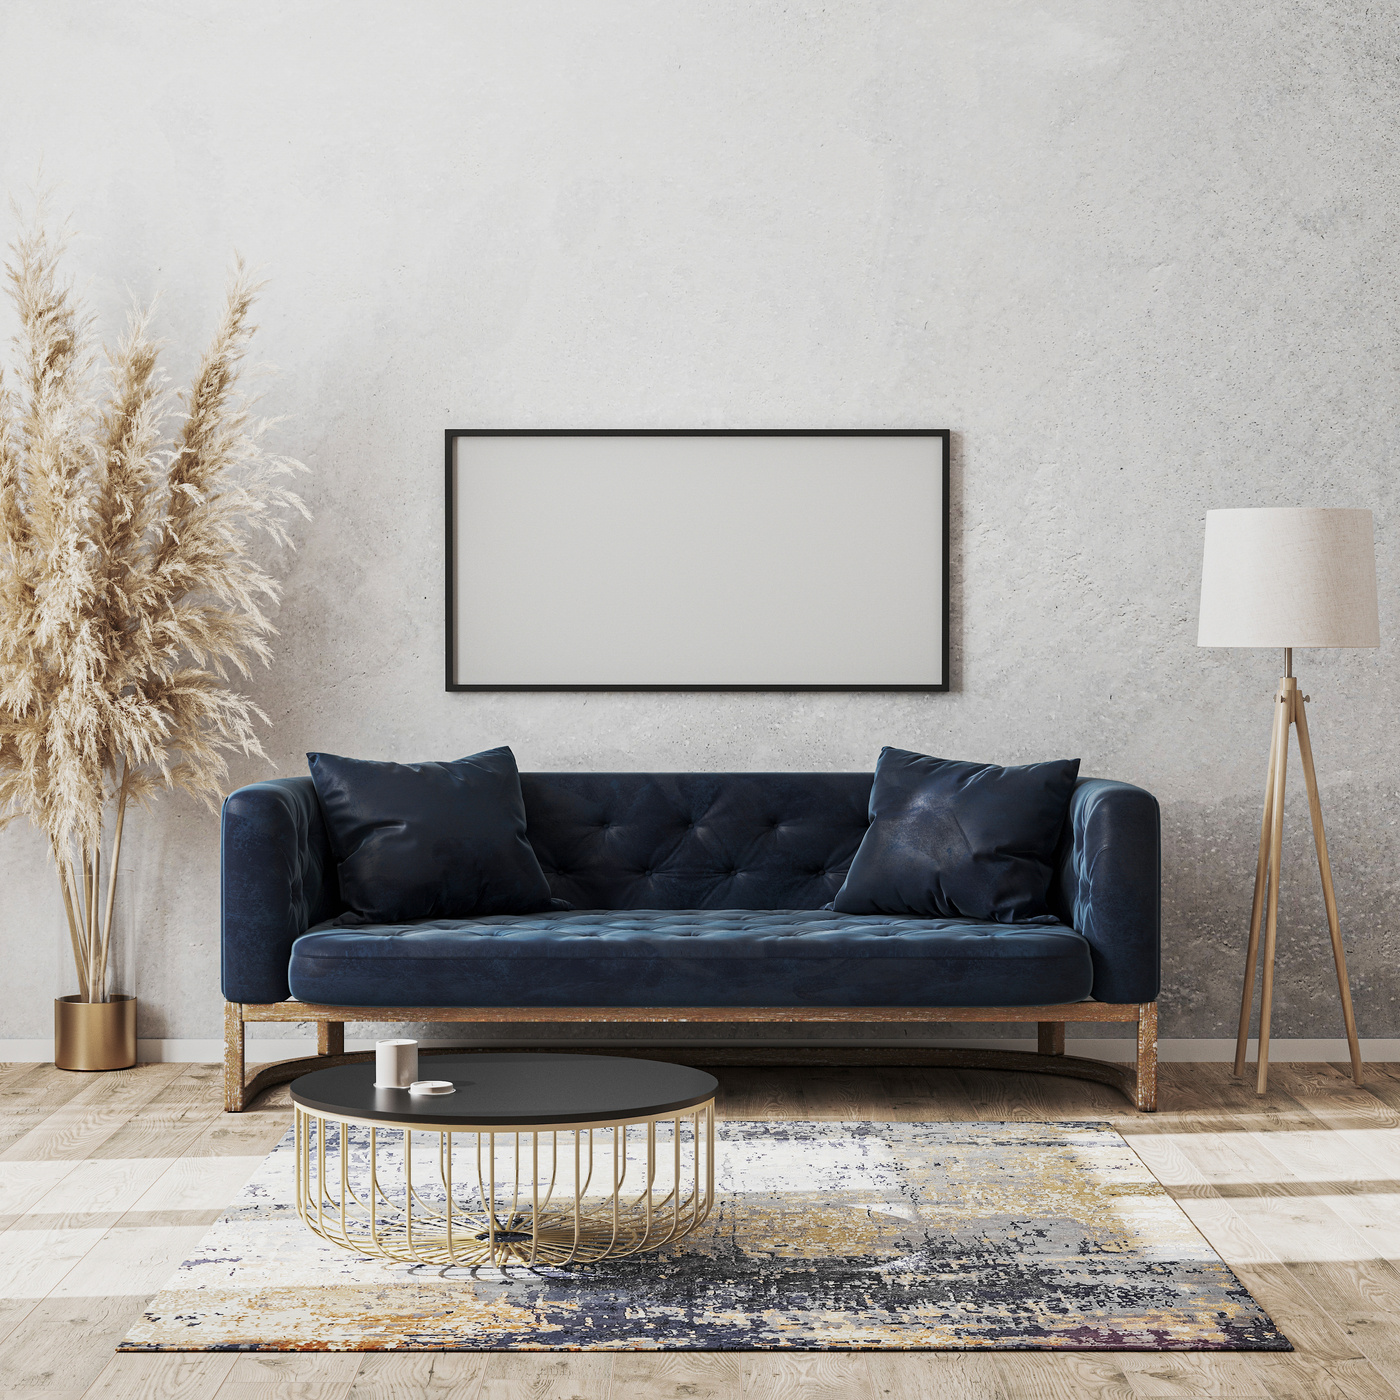 Blank Frame Hanging Over a Living Room Couch 